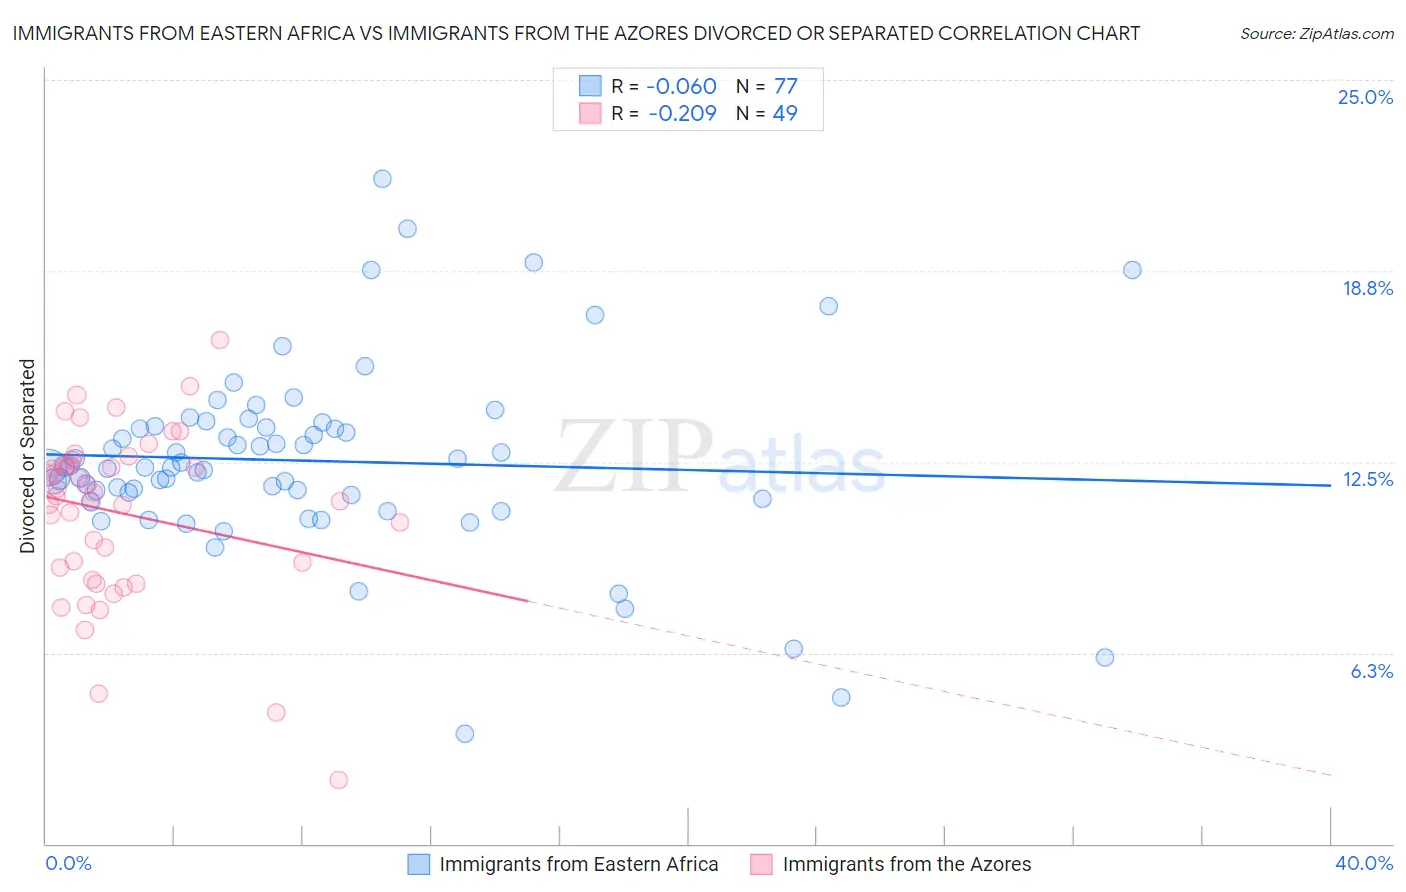 Immigrants from Eastern Africa vs Immigrants from the Azores Divorced or Separated